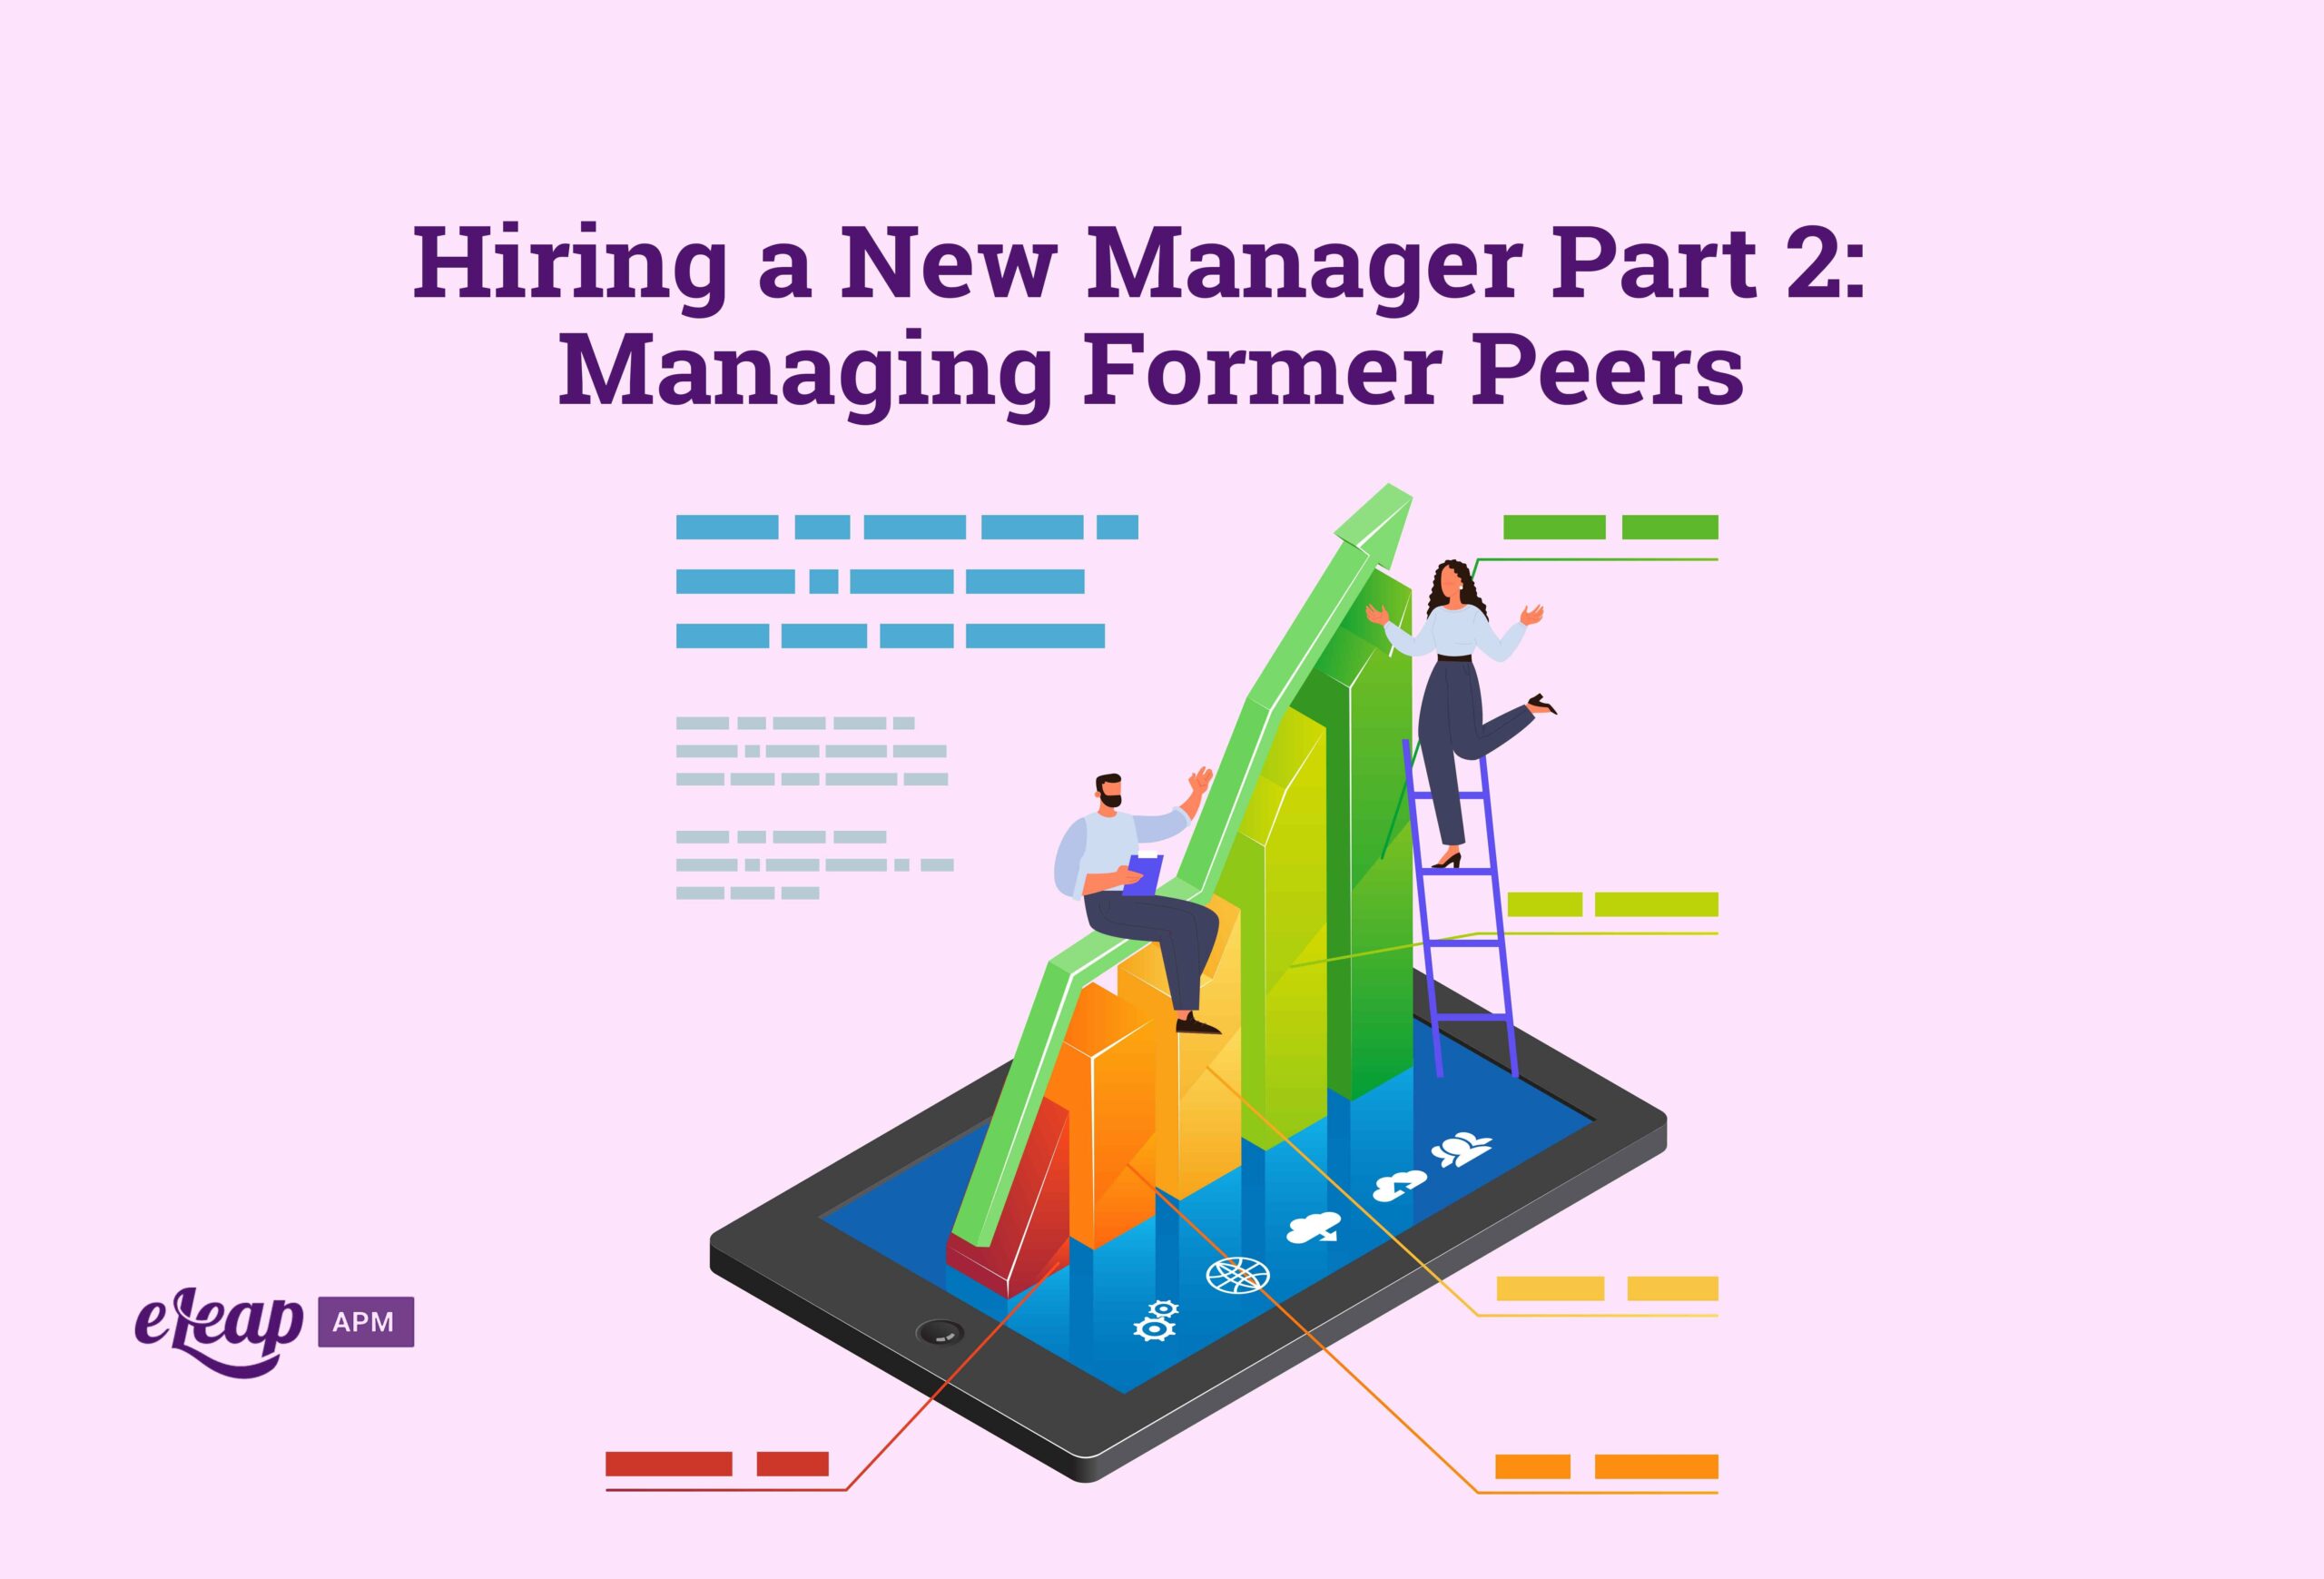 Hiring a New Manager Part 2: Managing Former Peers